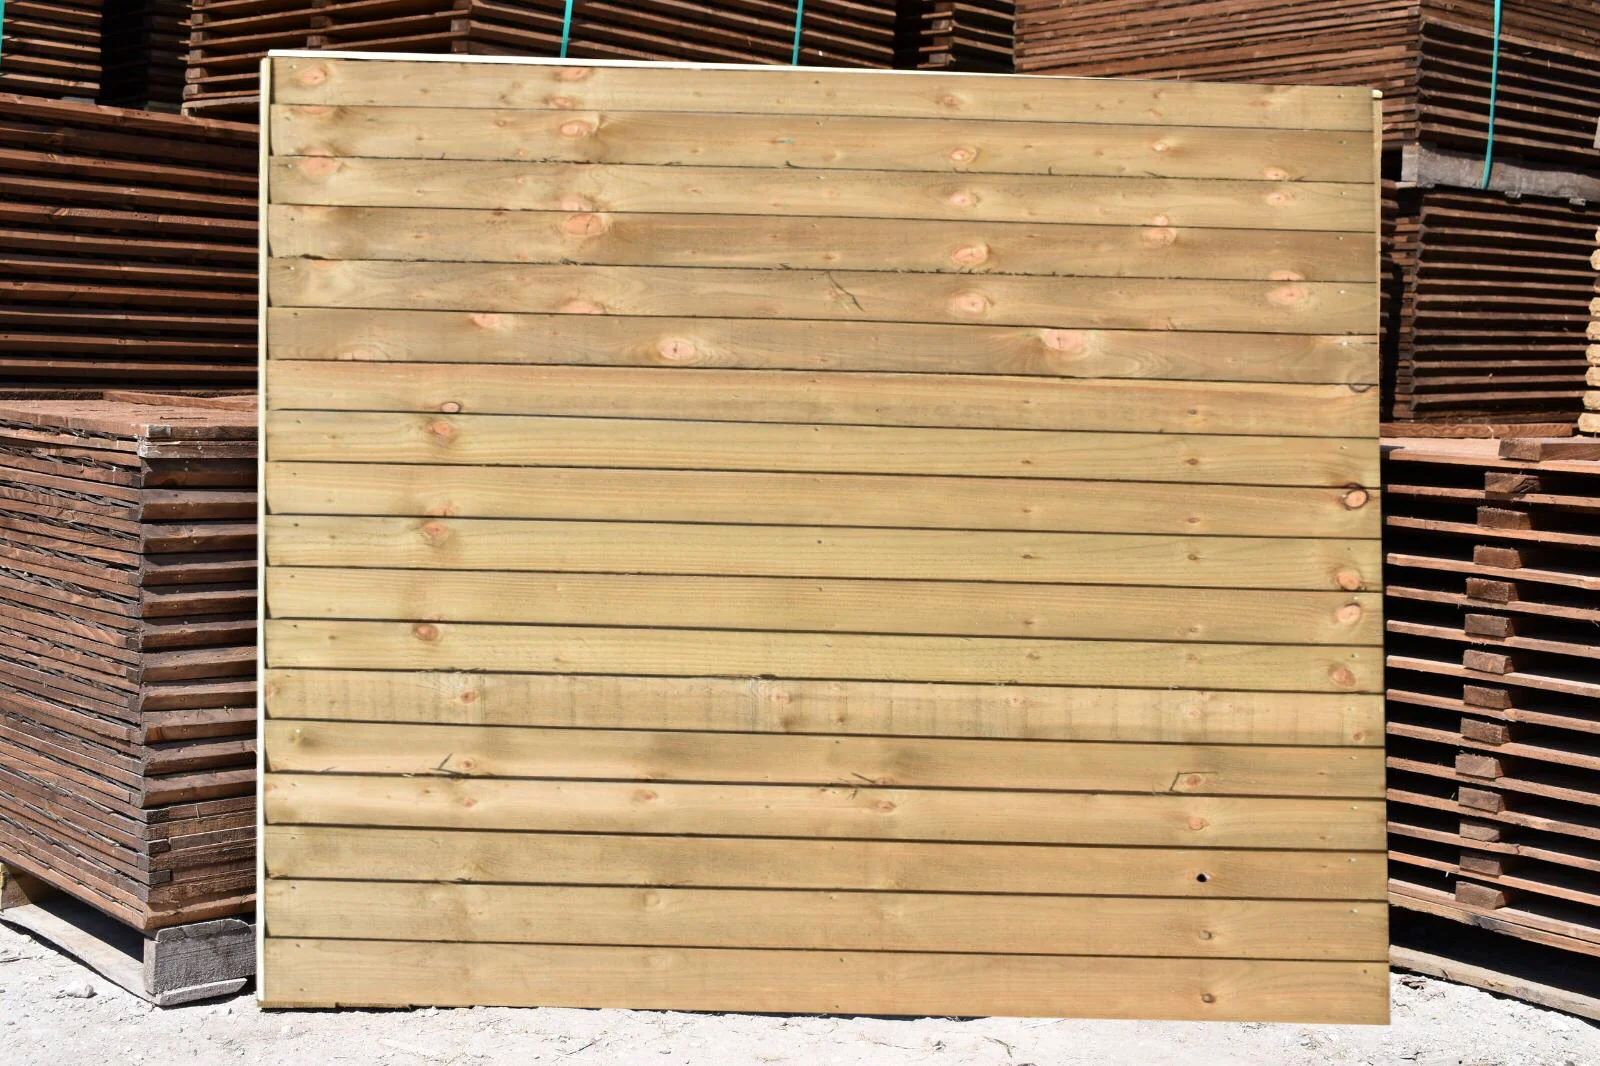 Where Can I Buy Fence Panels